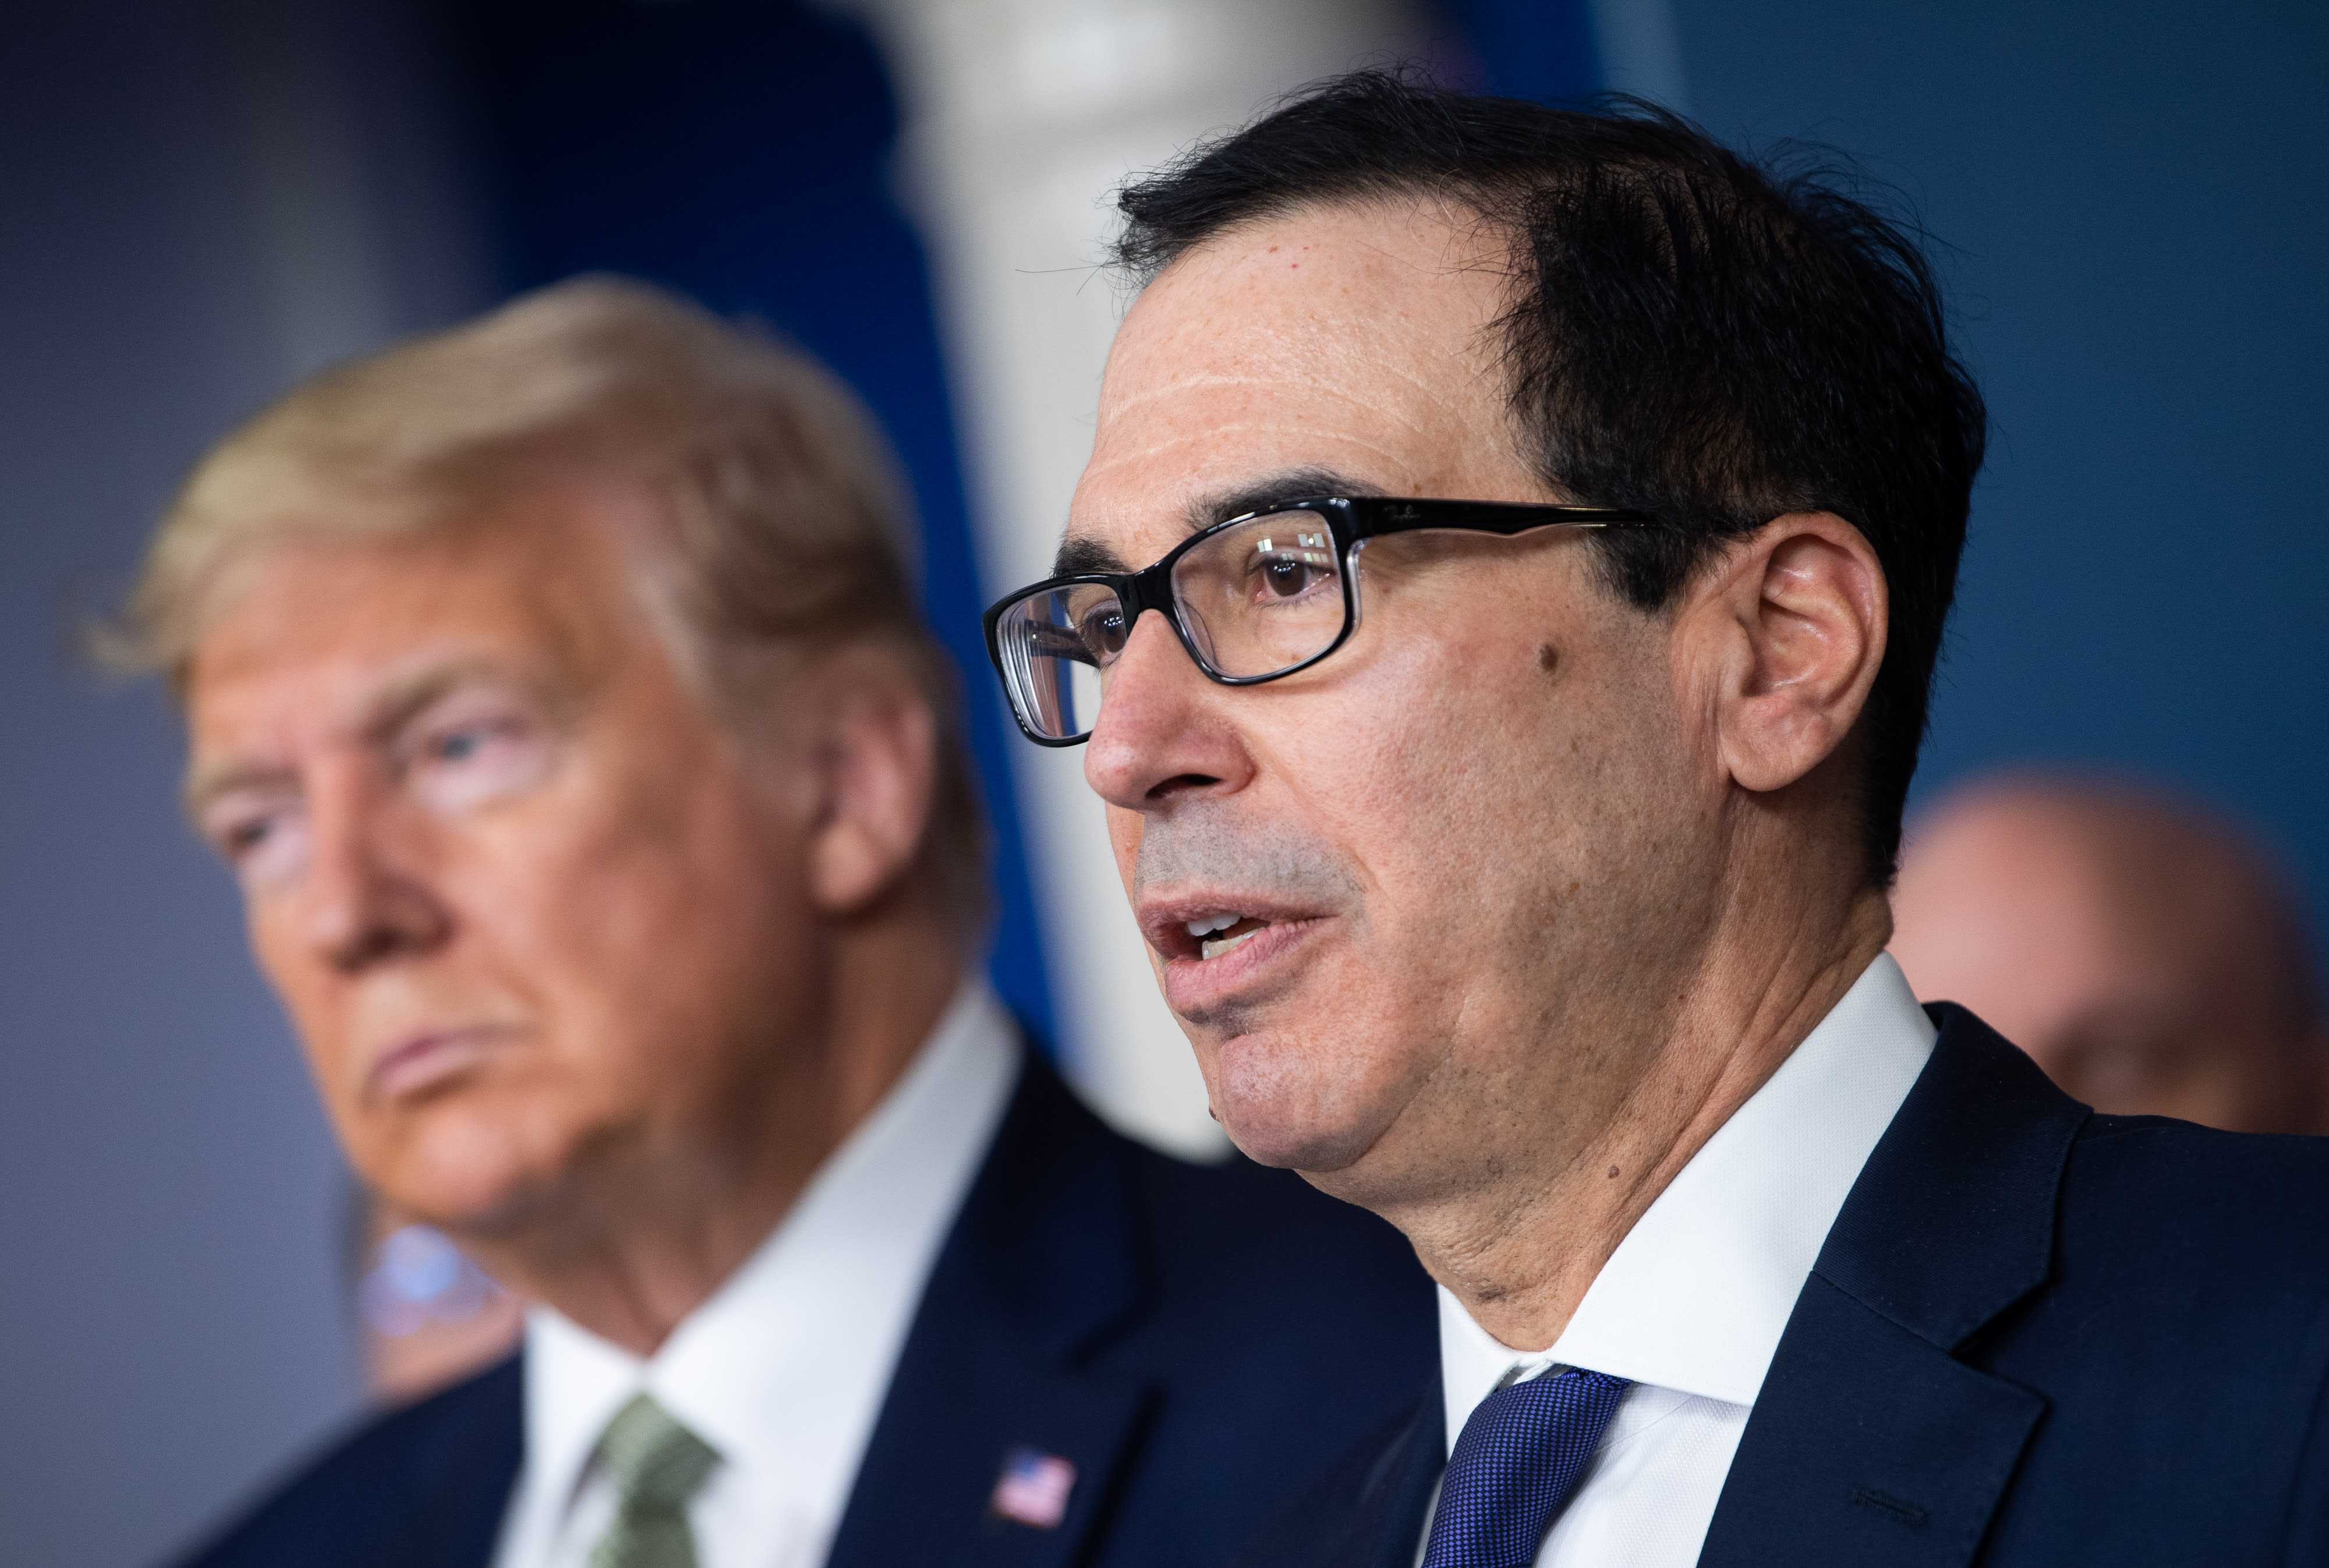 US: Financing programs for businesses hit by the coronavirus could amount to $4 trillion, Mnuchin says